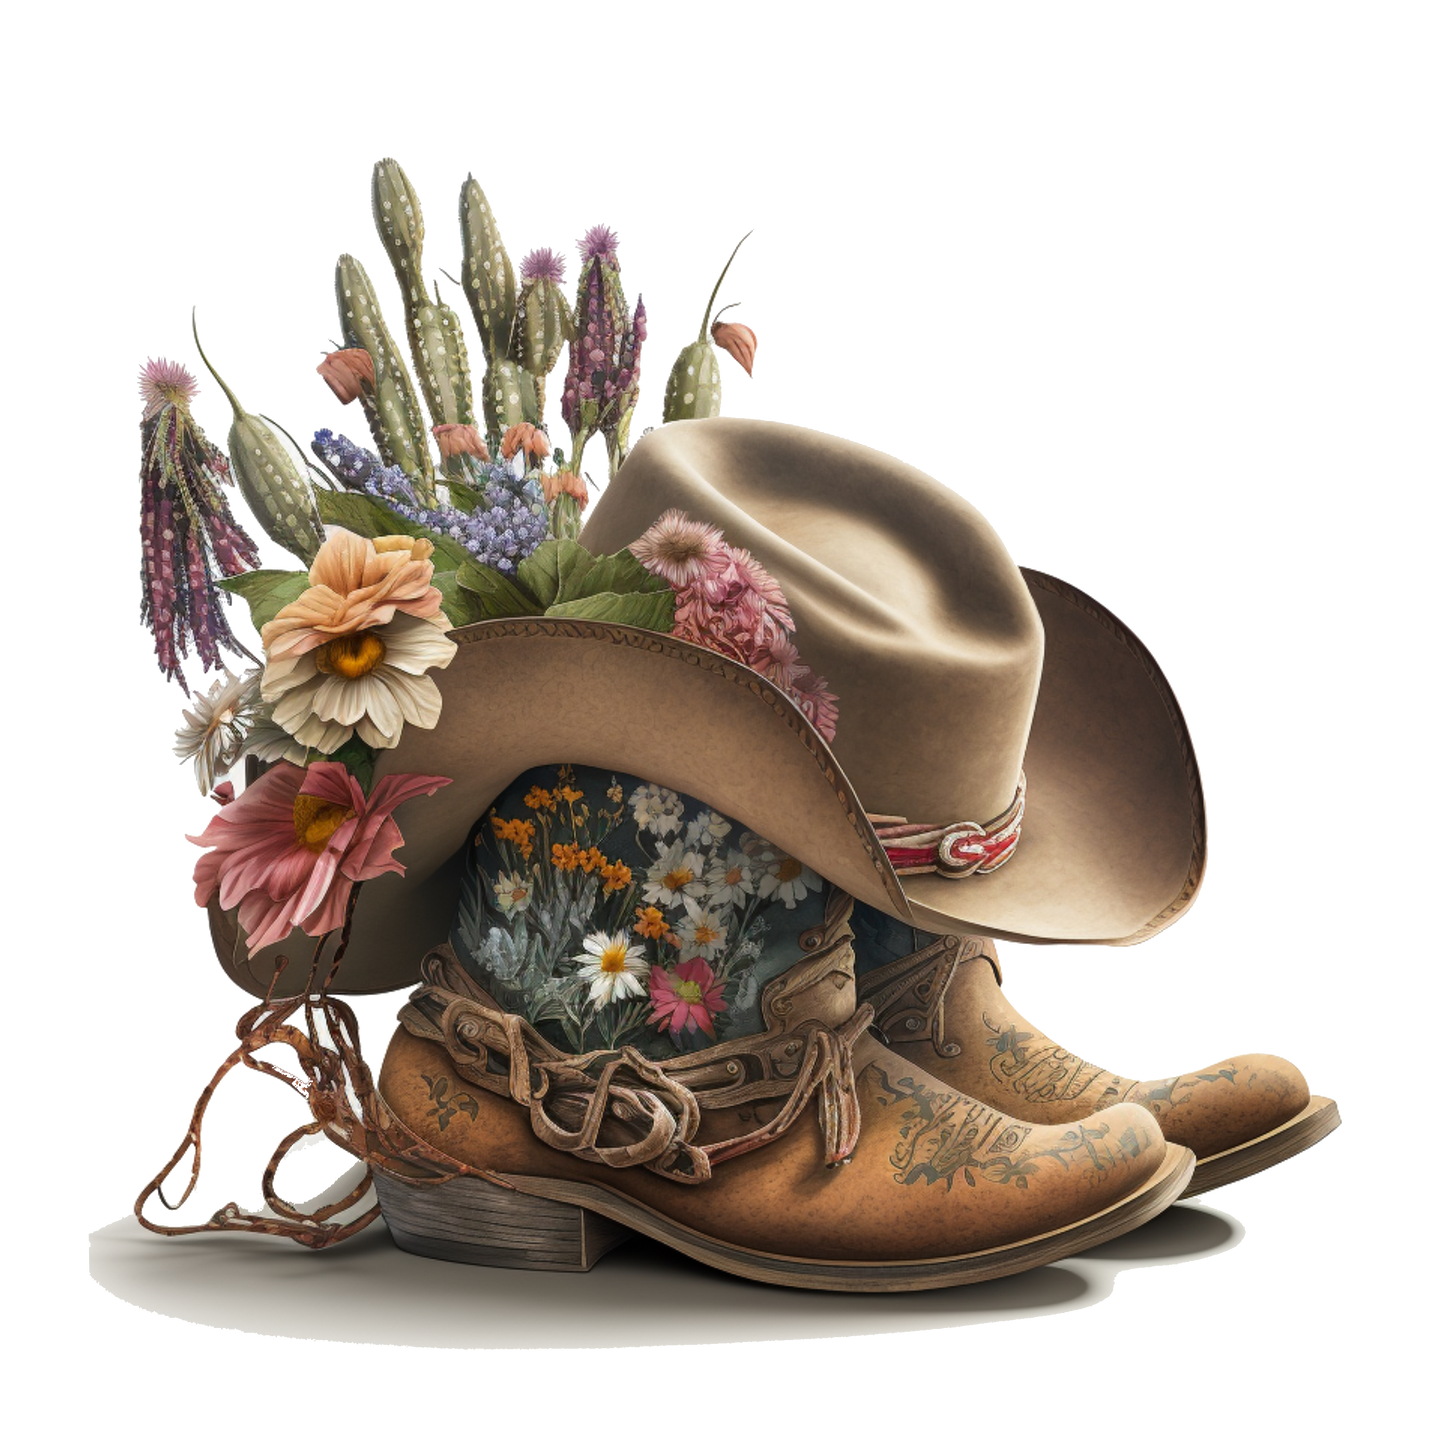 Cowboy Boots with flowers